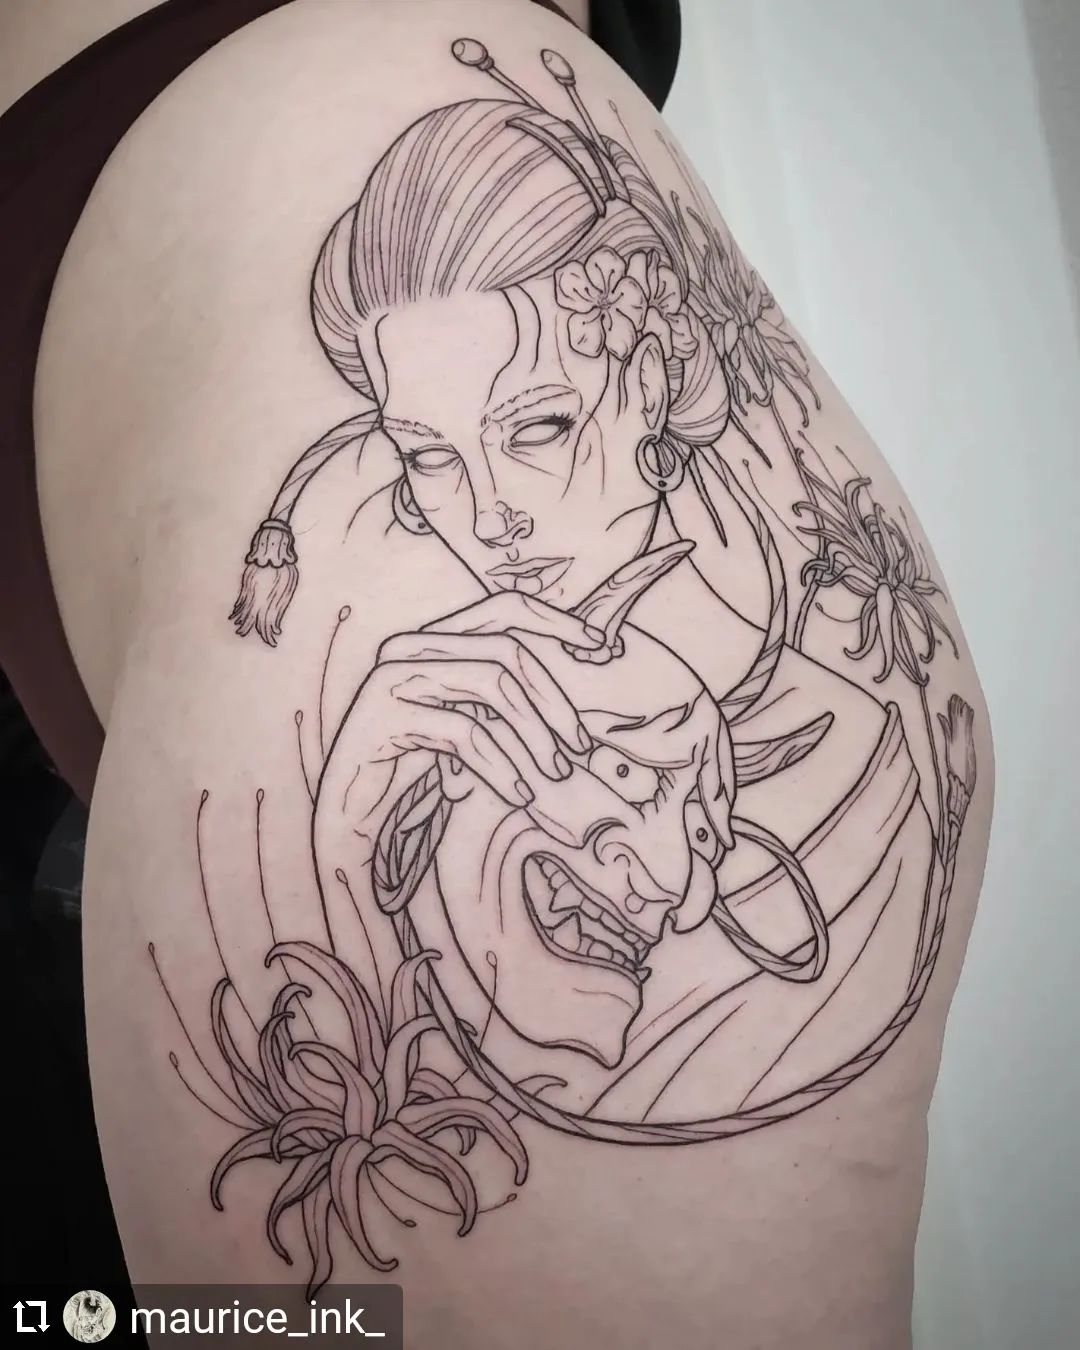 Neu von @maurice_ink_
...
Lines for this geisha are done  really looking forward